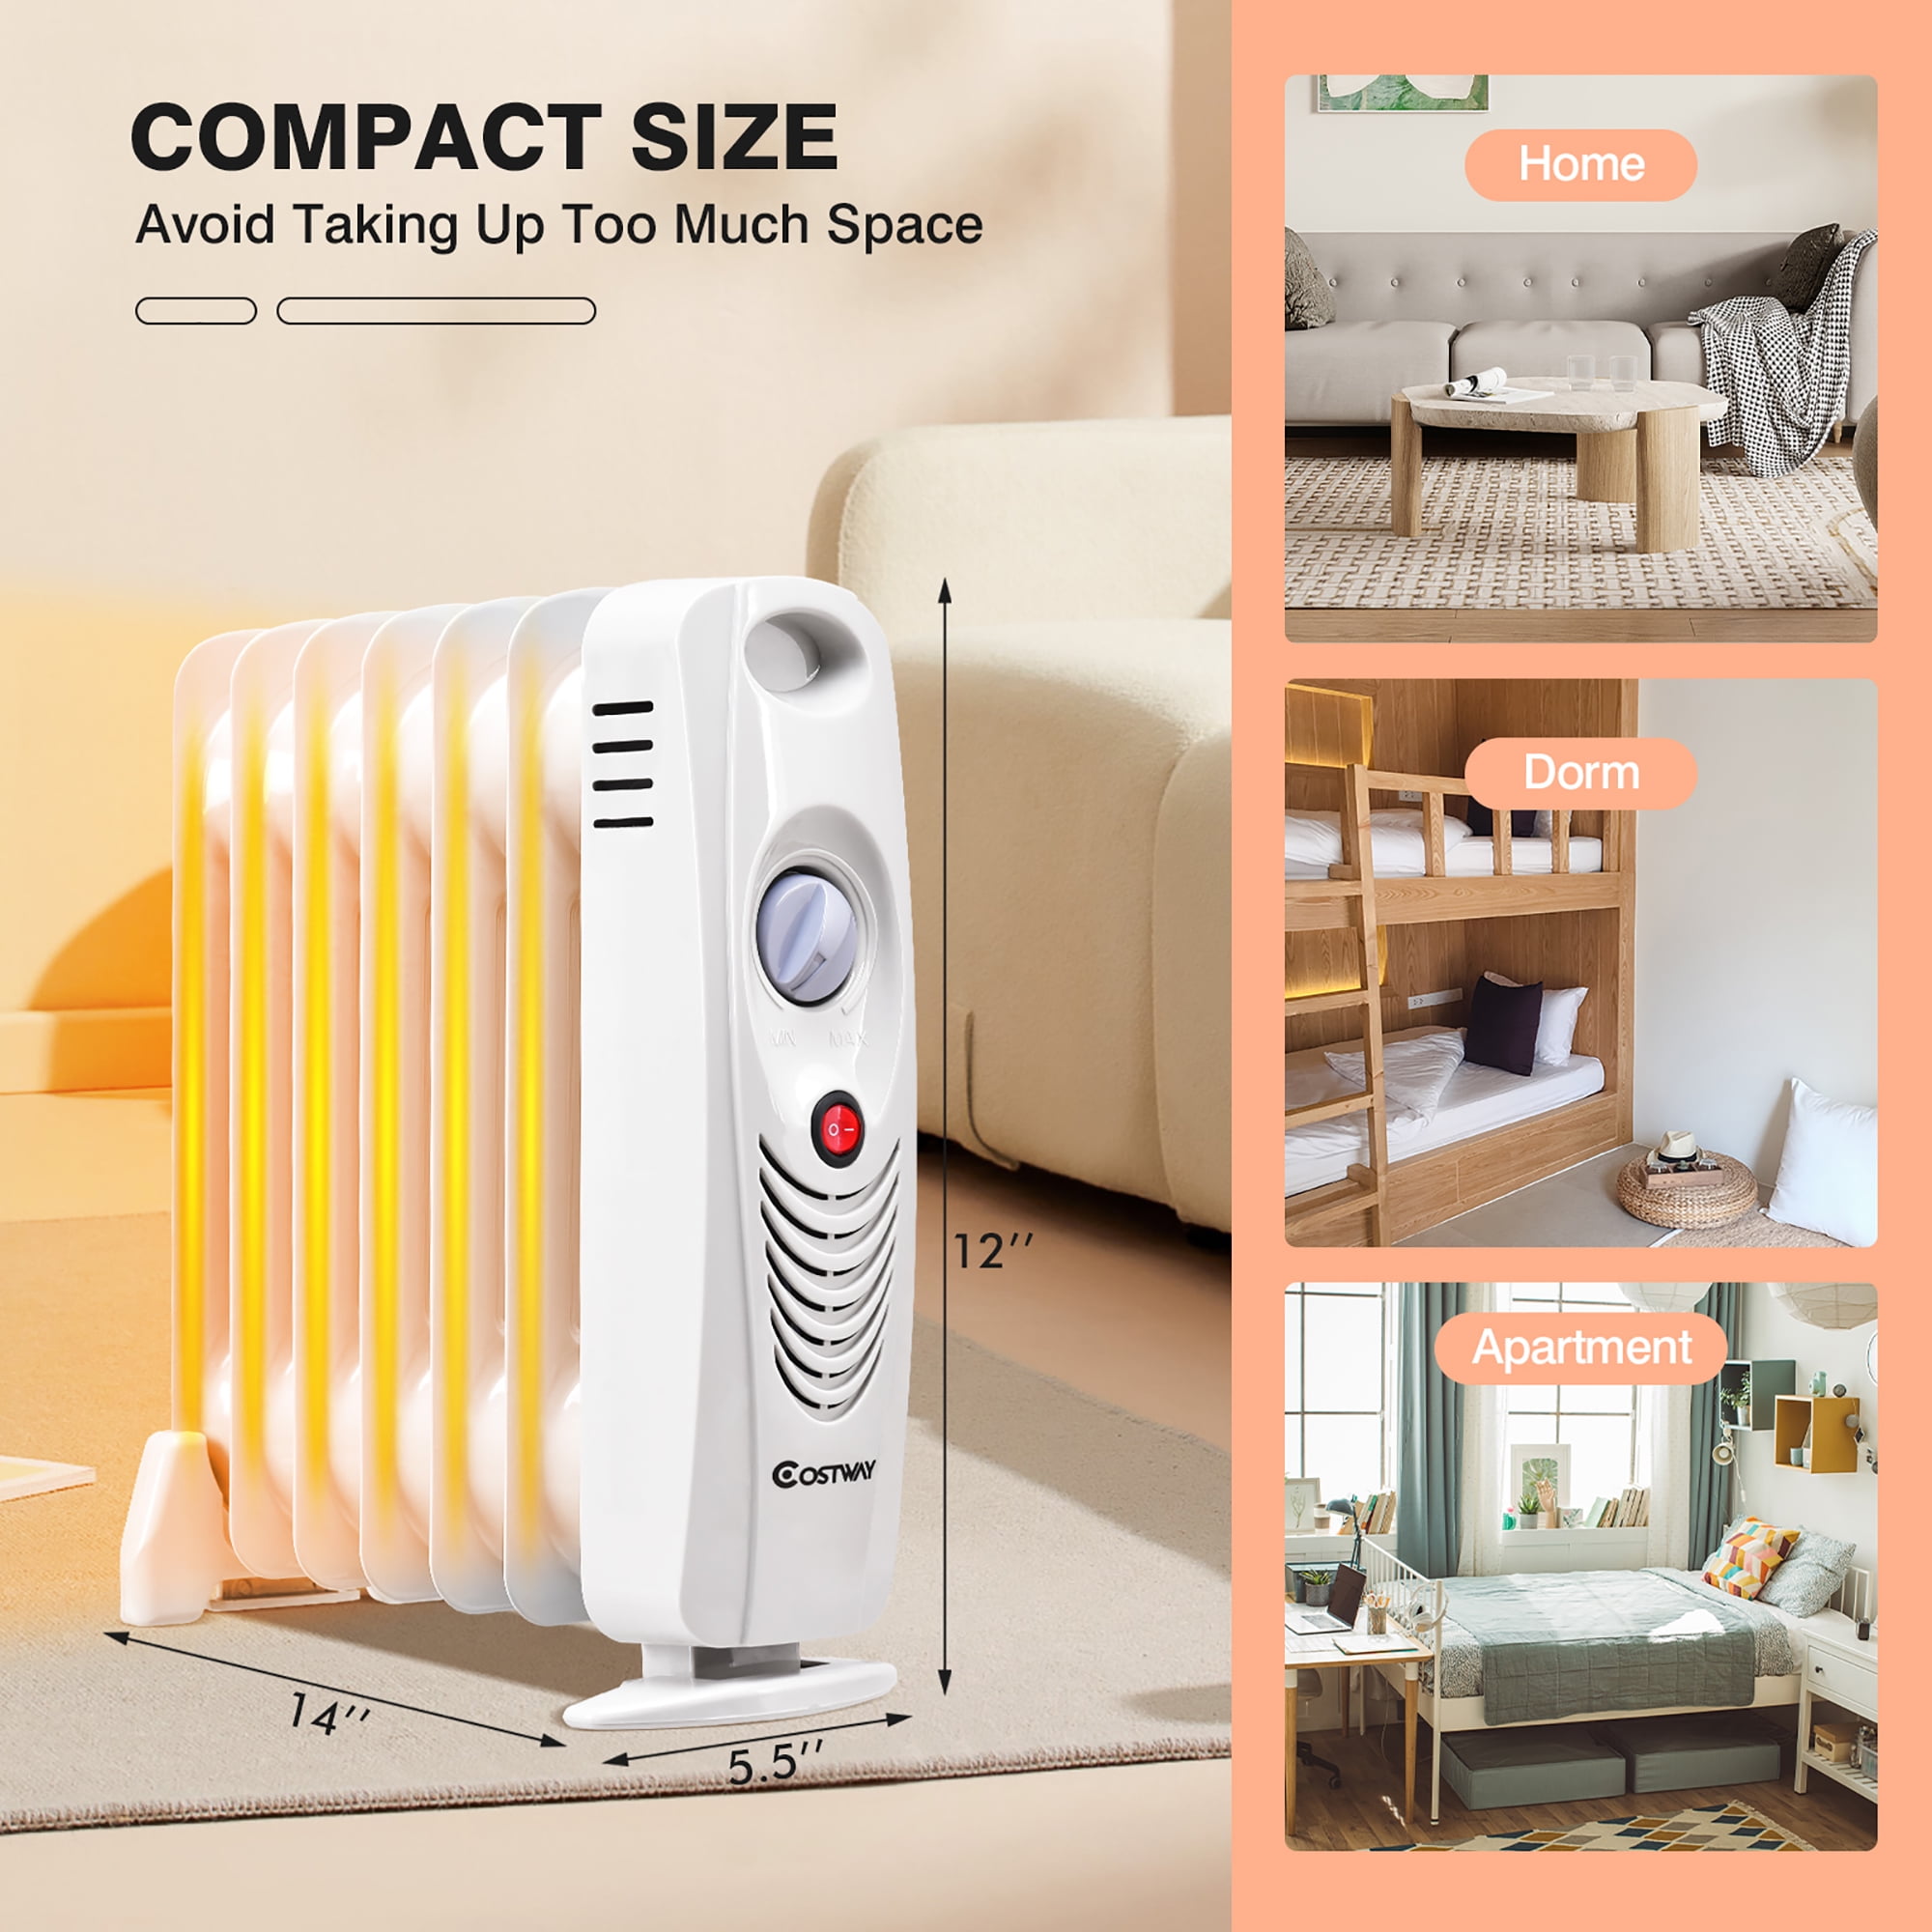 Costway 700 W Portable Mini Electric Oil Filled Radiator Heater 7-Fin  Thermostat Home 